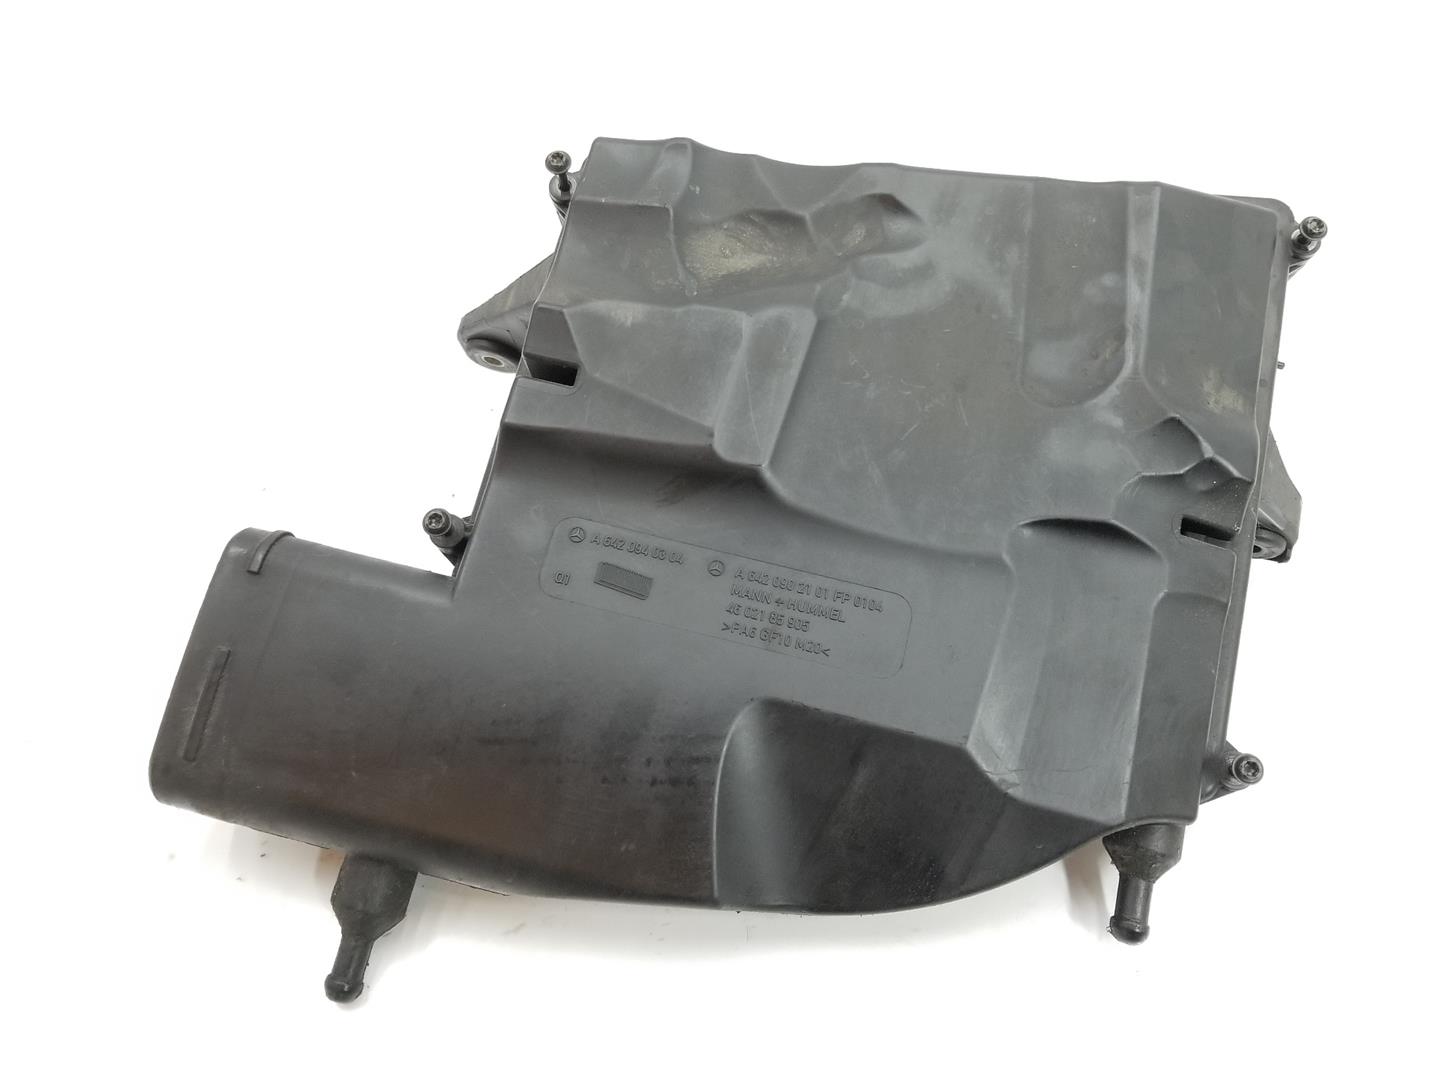 MERCEDES-BENZ R-Class W251 (2005-2017) Other Engine Compartment Parts A6420902101, A6420902101 24179434